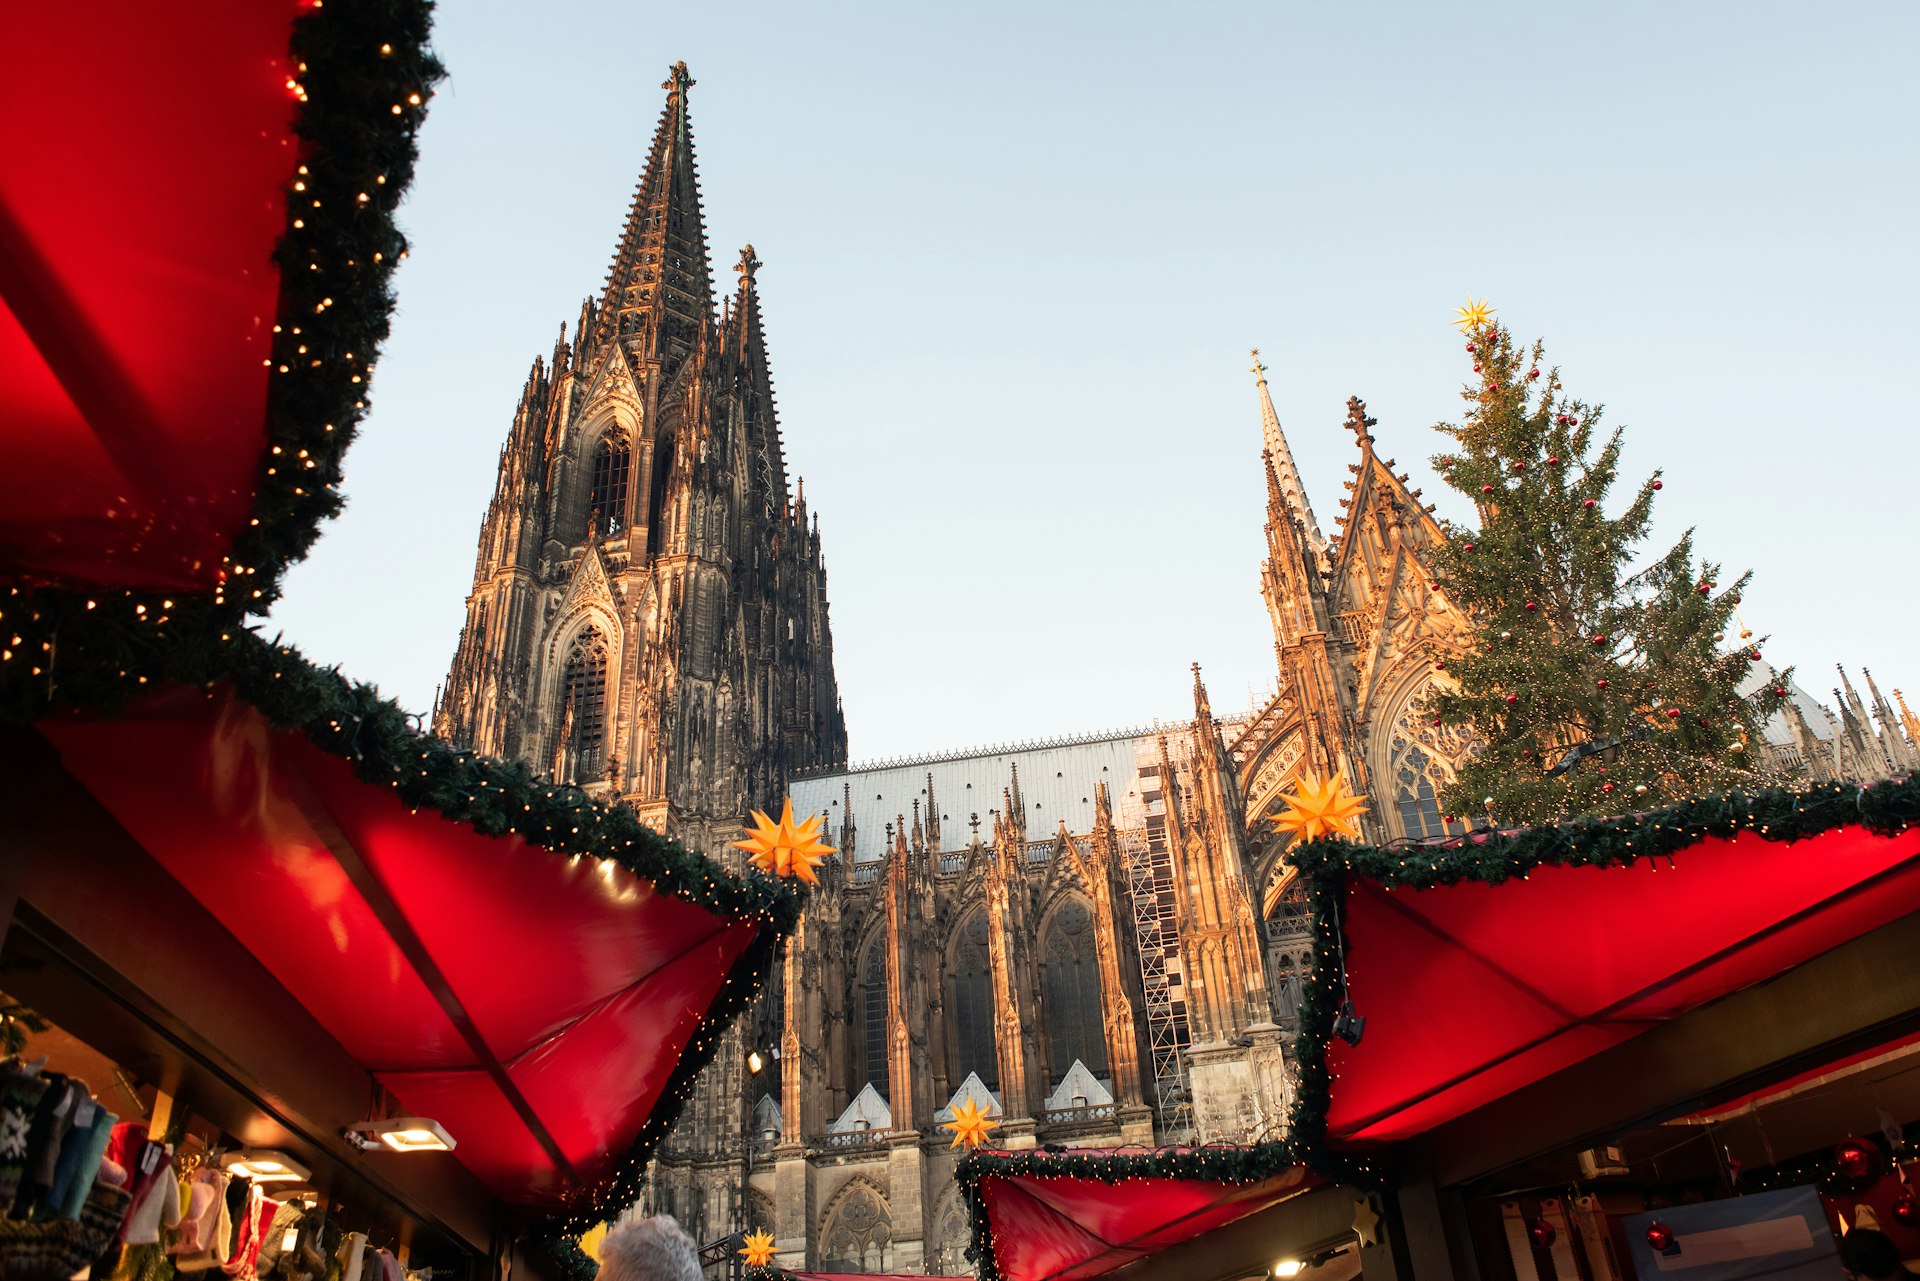 The traditional Christmas market set up in Cologne, Germany, with the cathedral in the background.